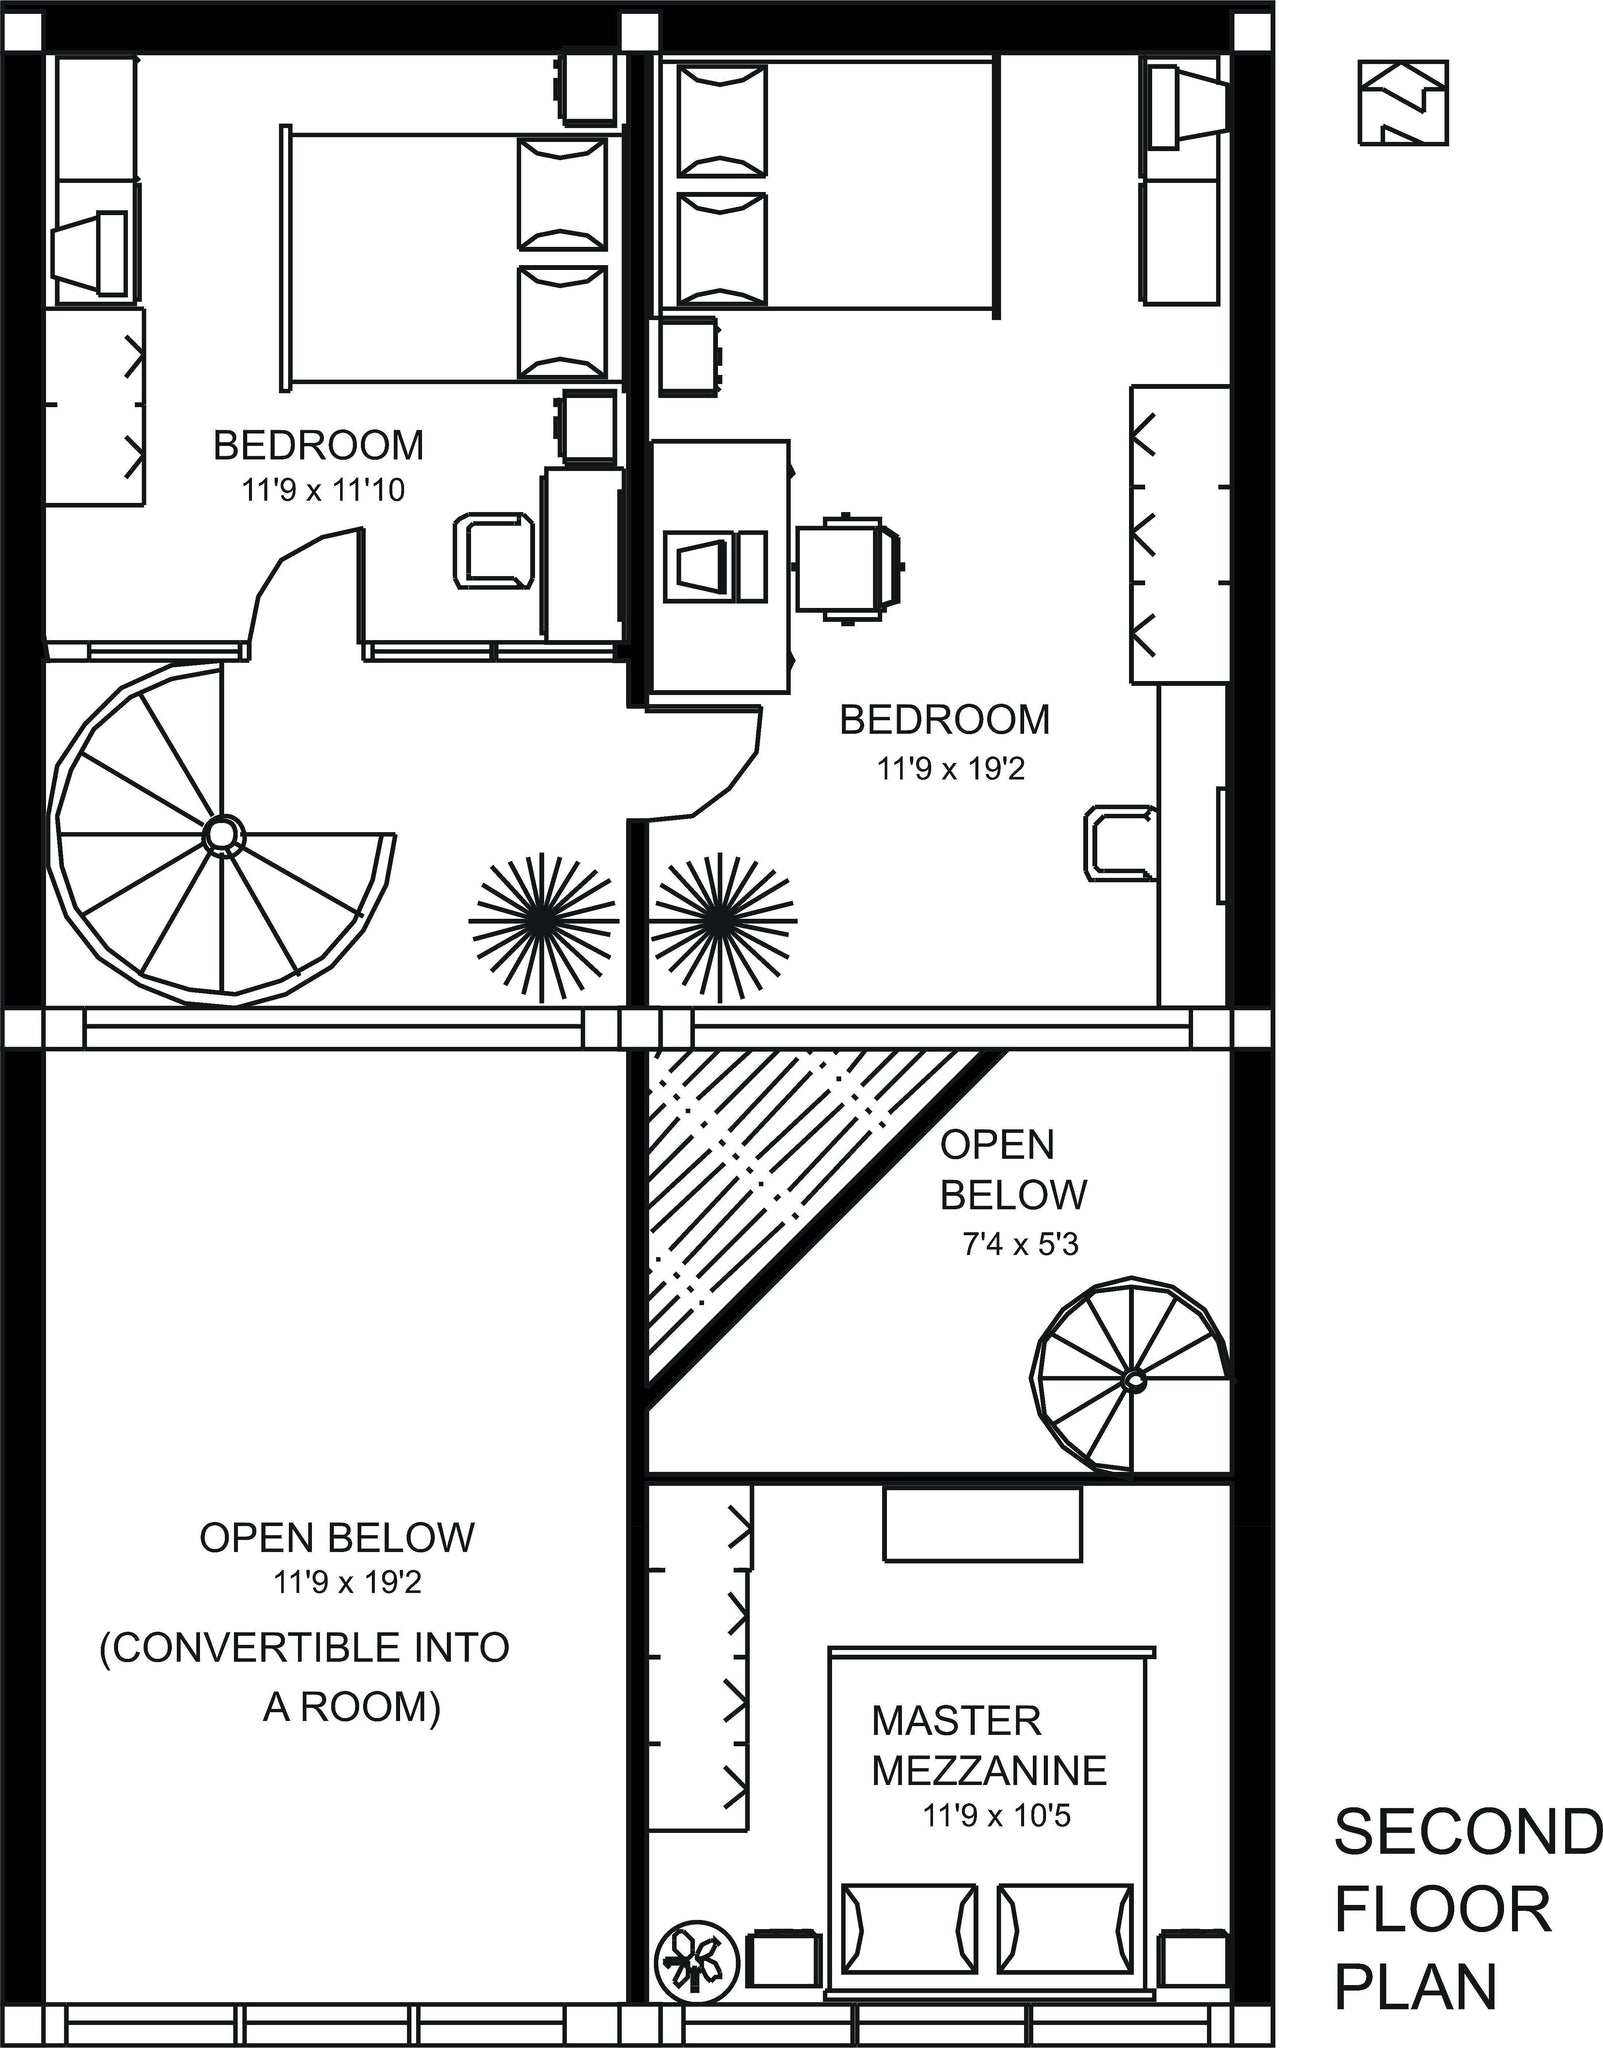 02 Earth-Sheltered Active - Second Floor Plan